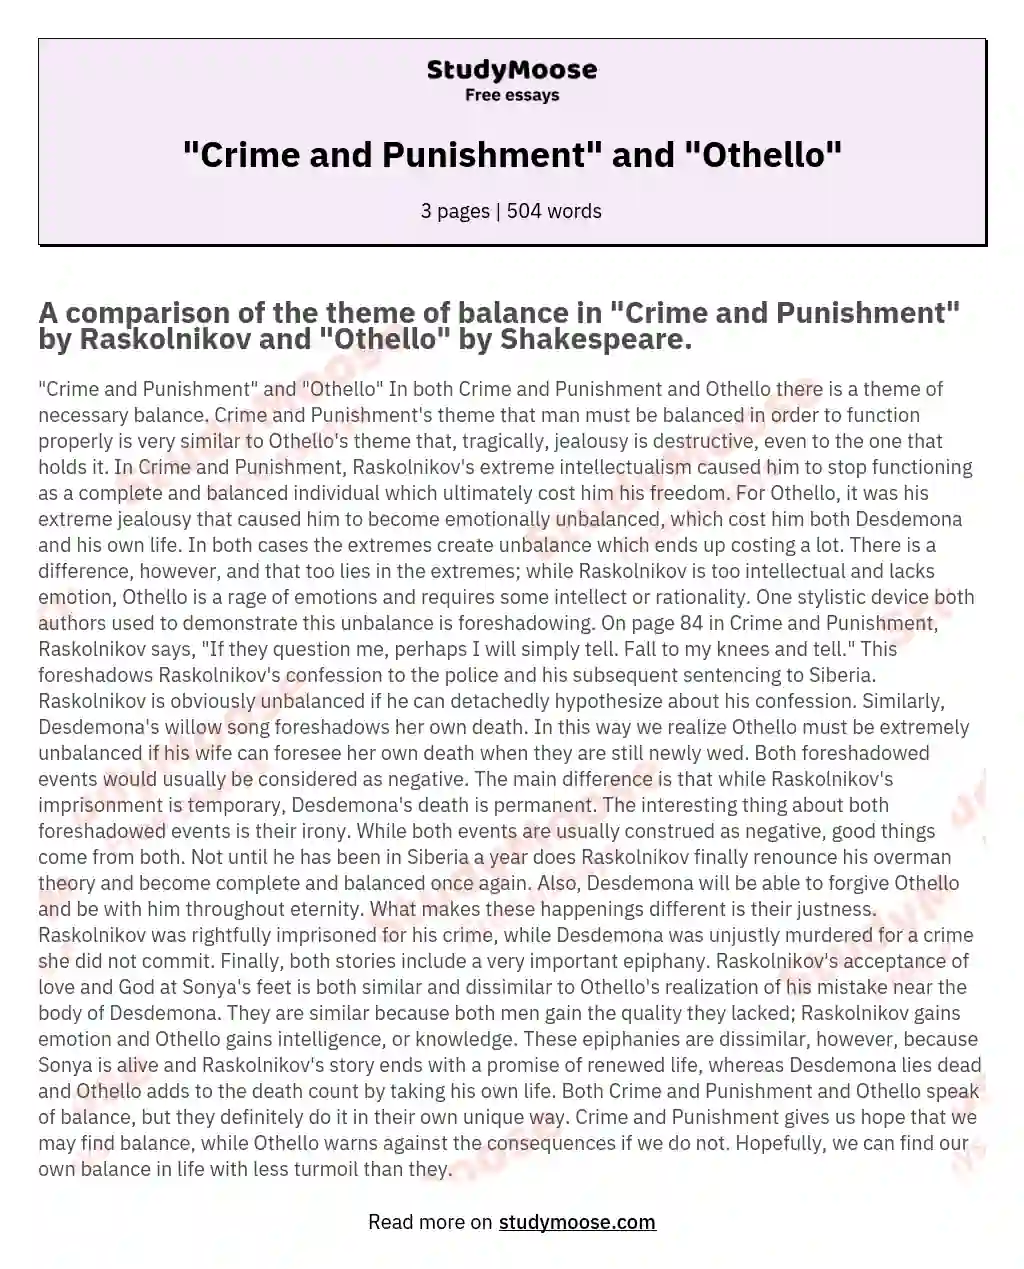 "Crime and Punishment" and "Othello"